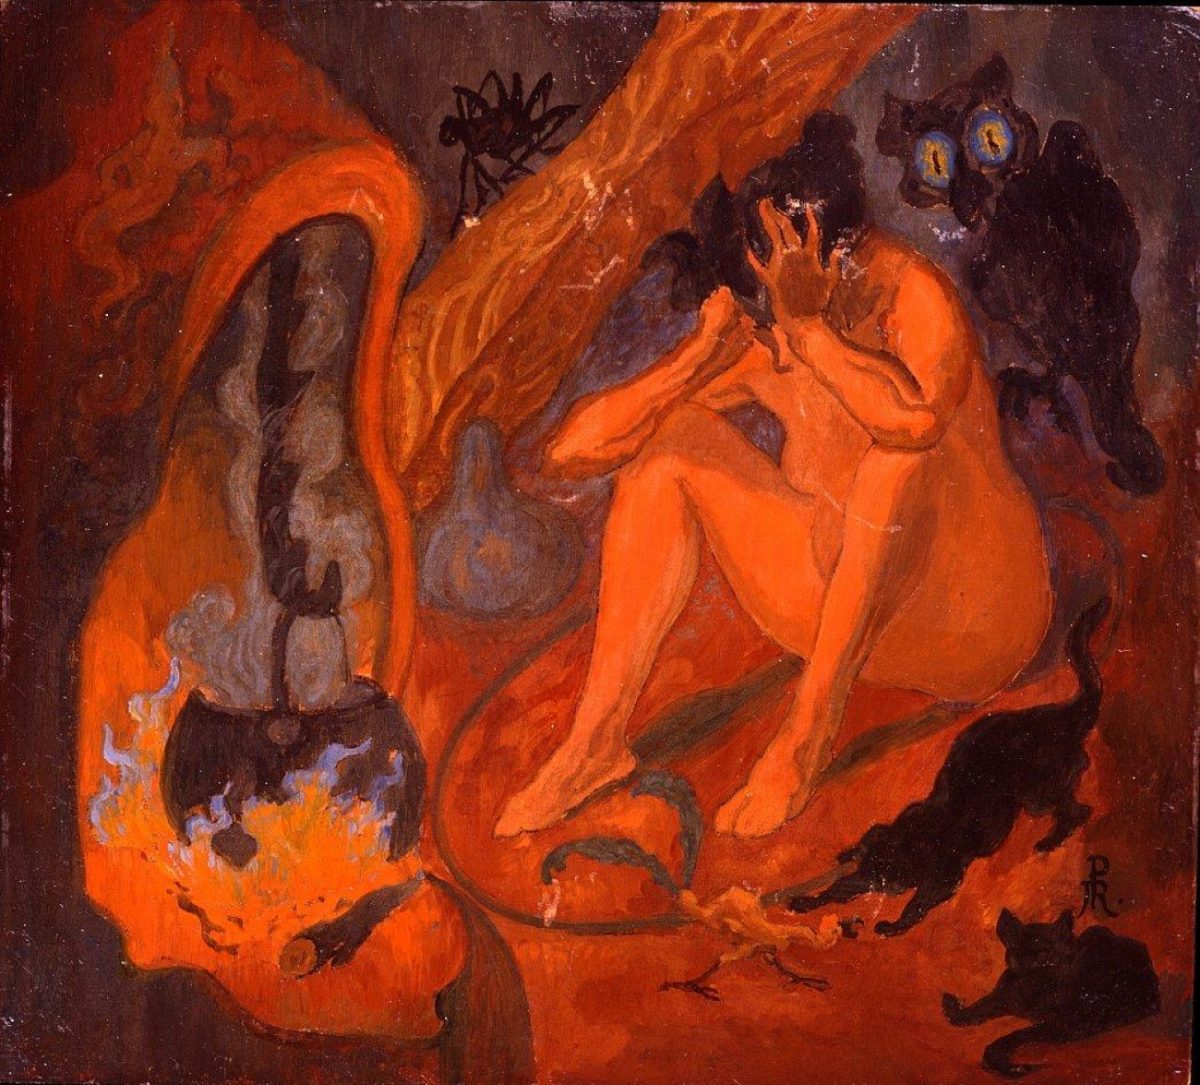 Paul Ranson, art, painting, occult, witchcraft, witches, myth, magic, 1800s